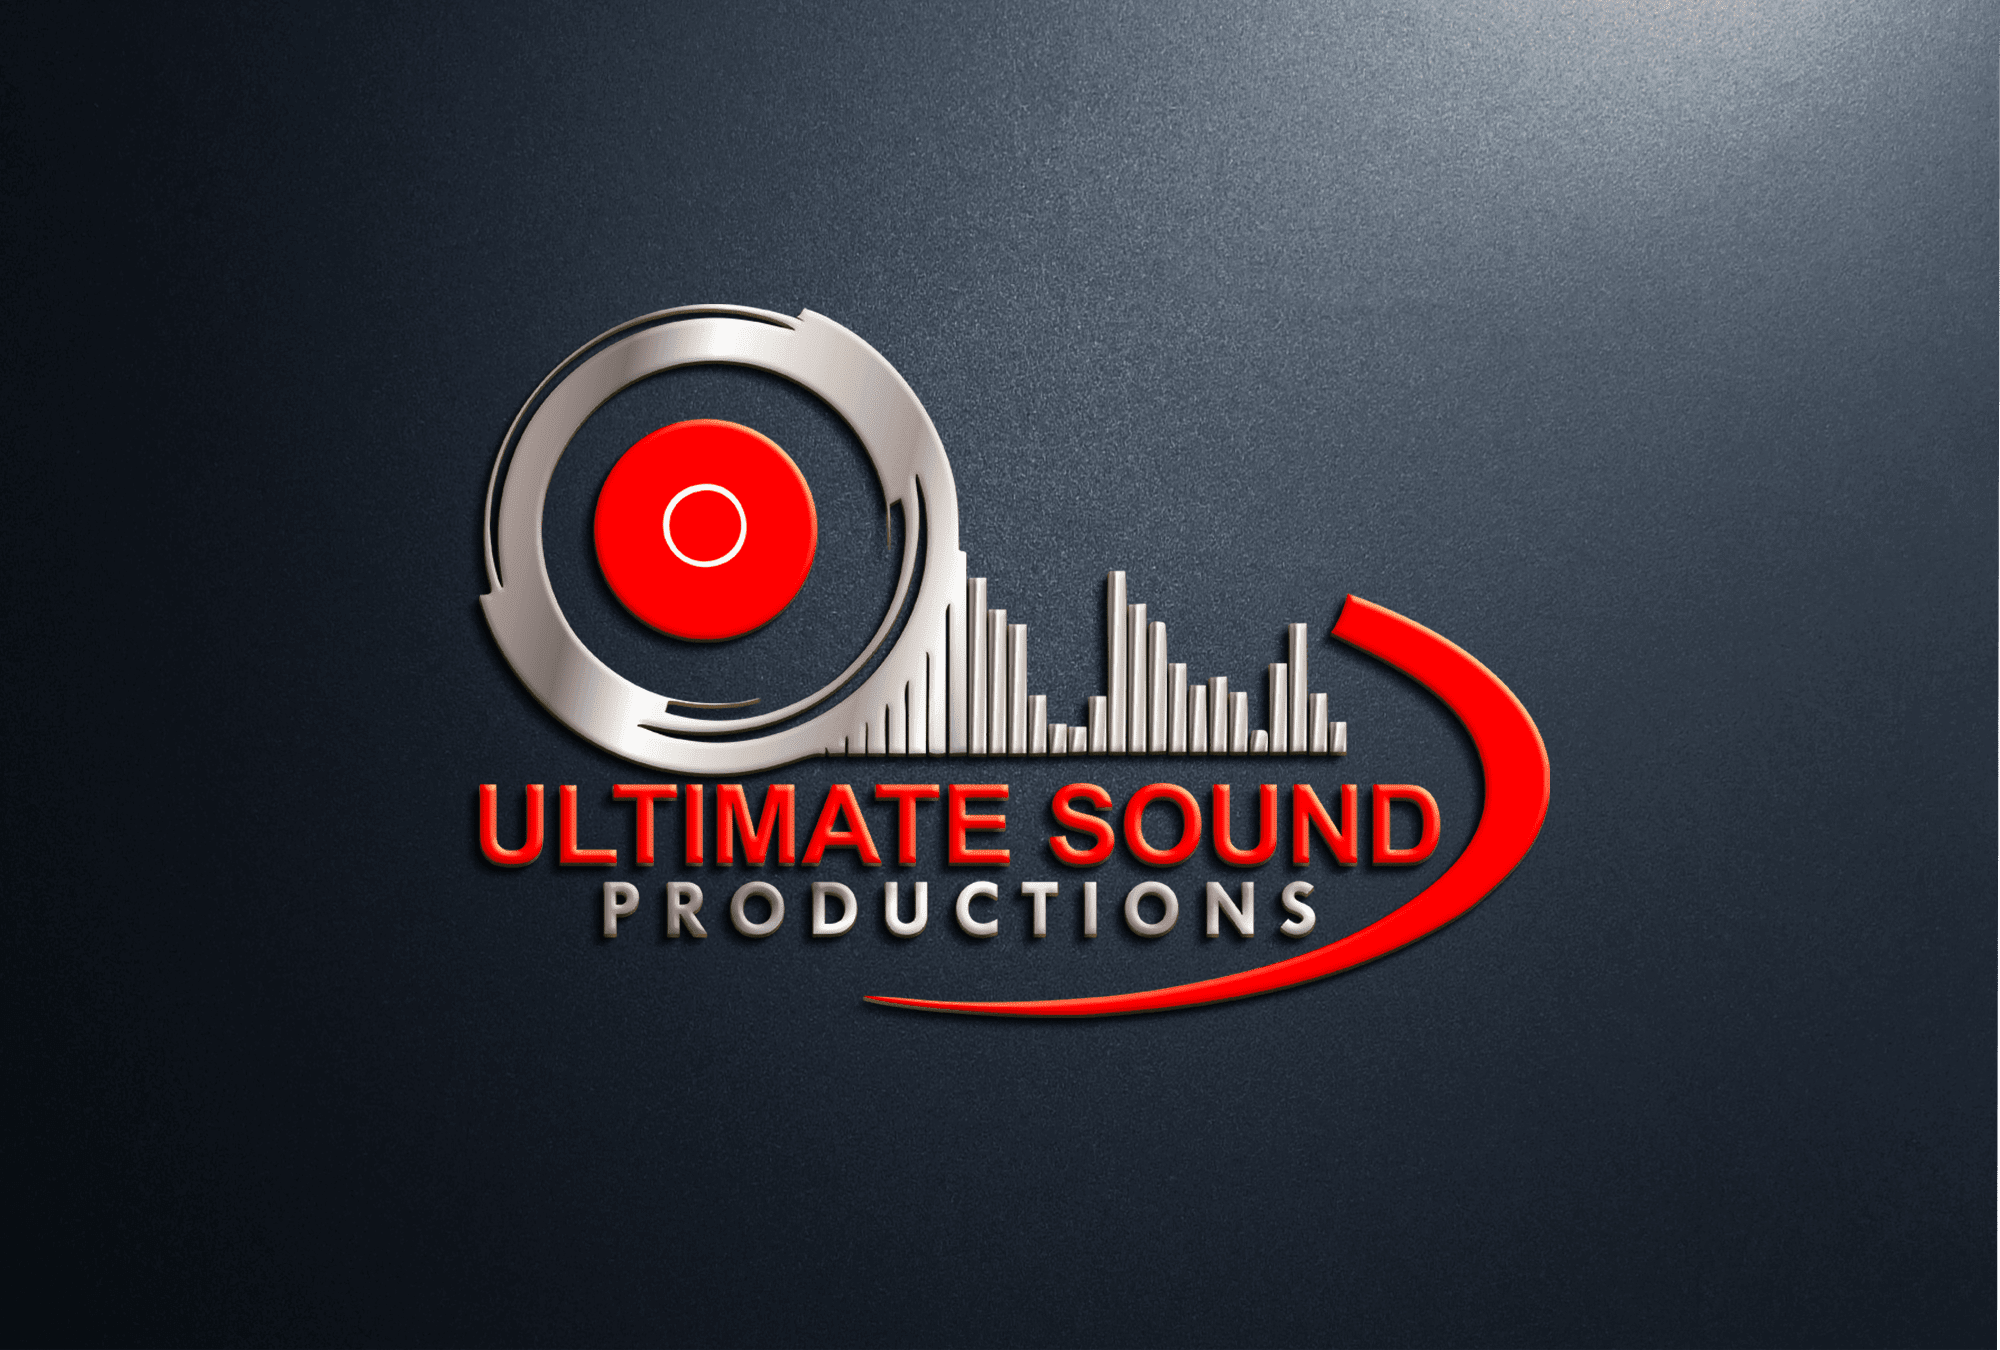 ULTIMATE SOUND PRODUCTIONS